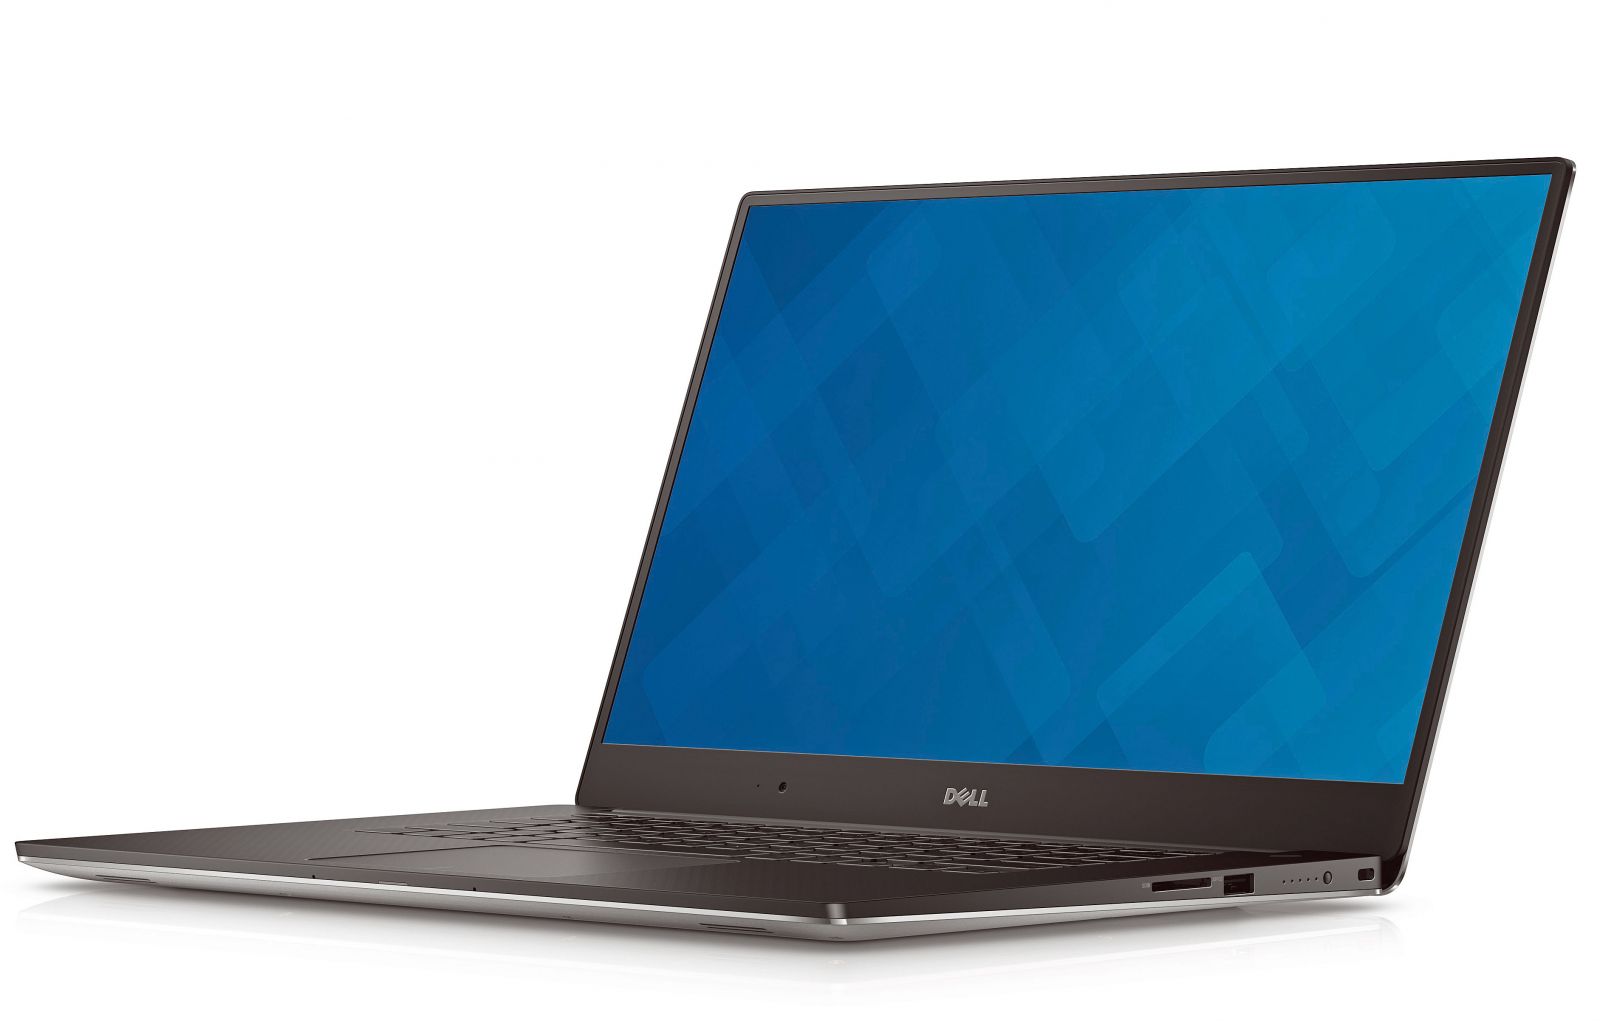 Review: Dell Precision 5510, missing the target